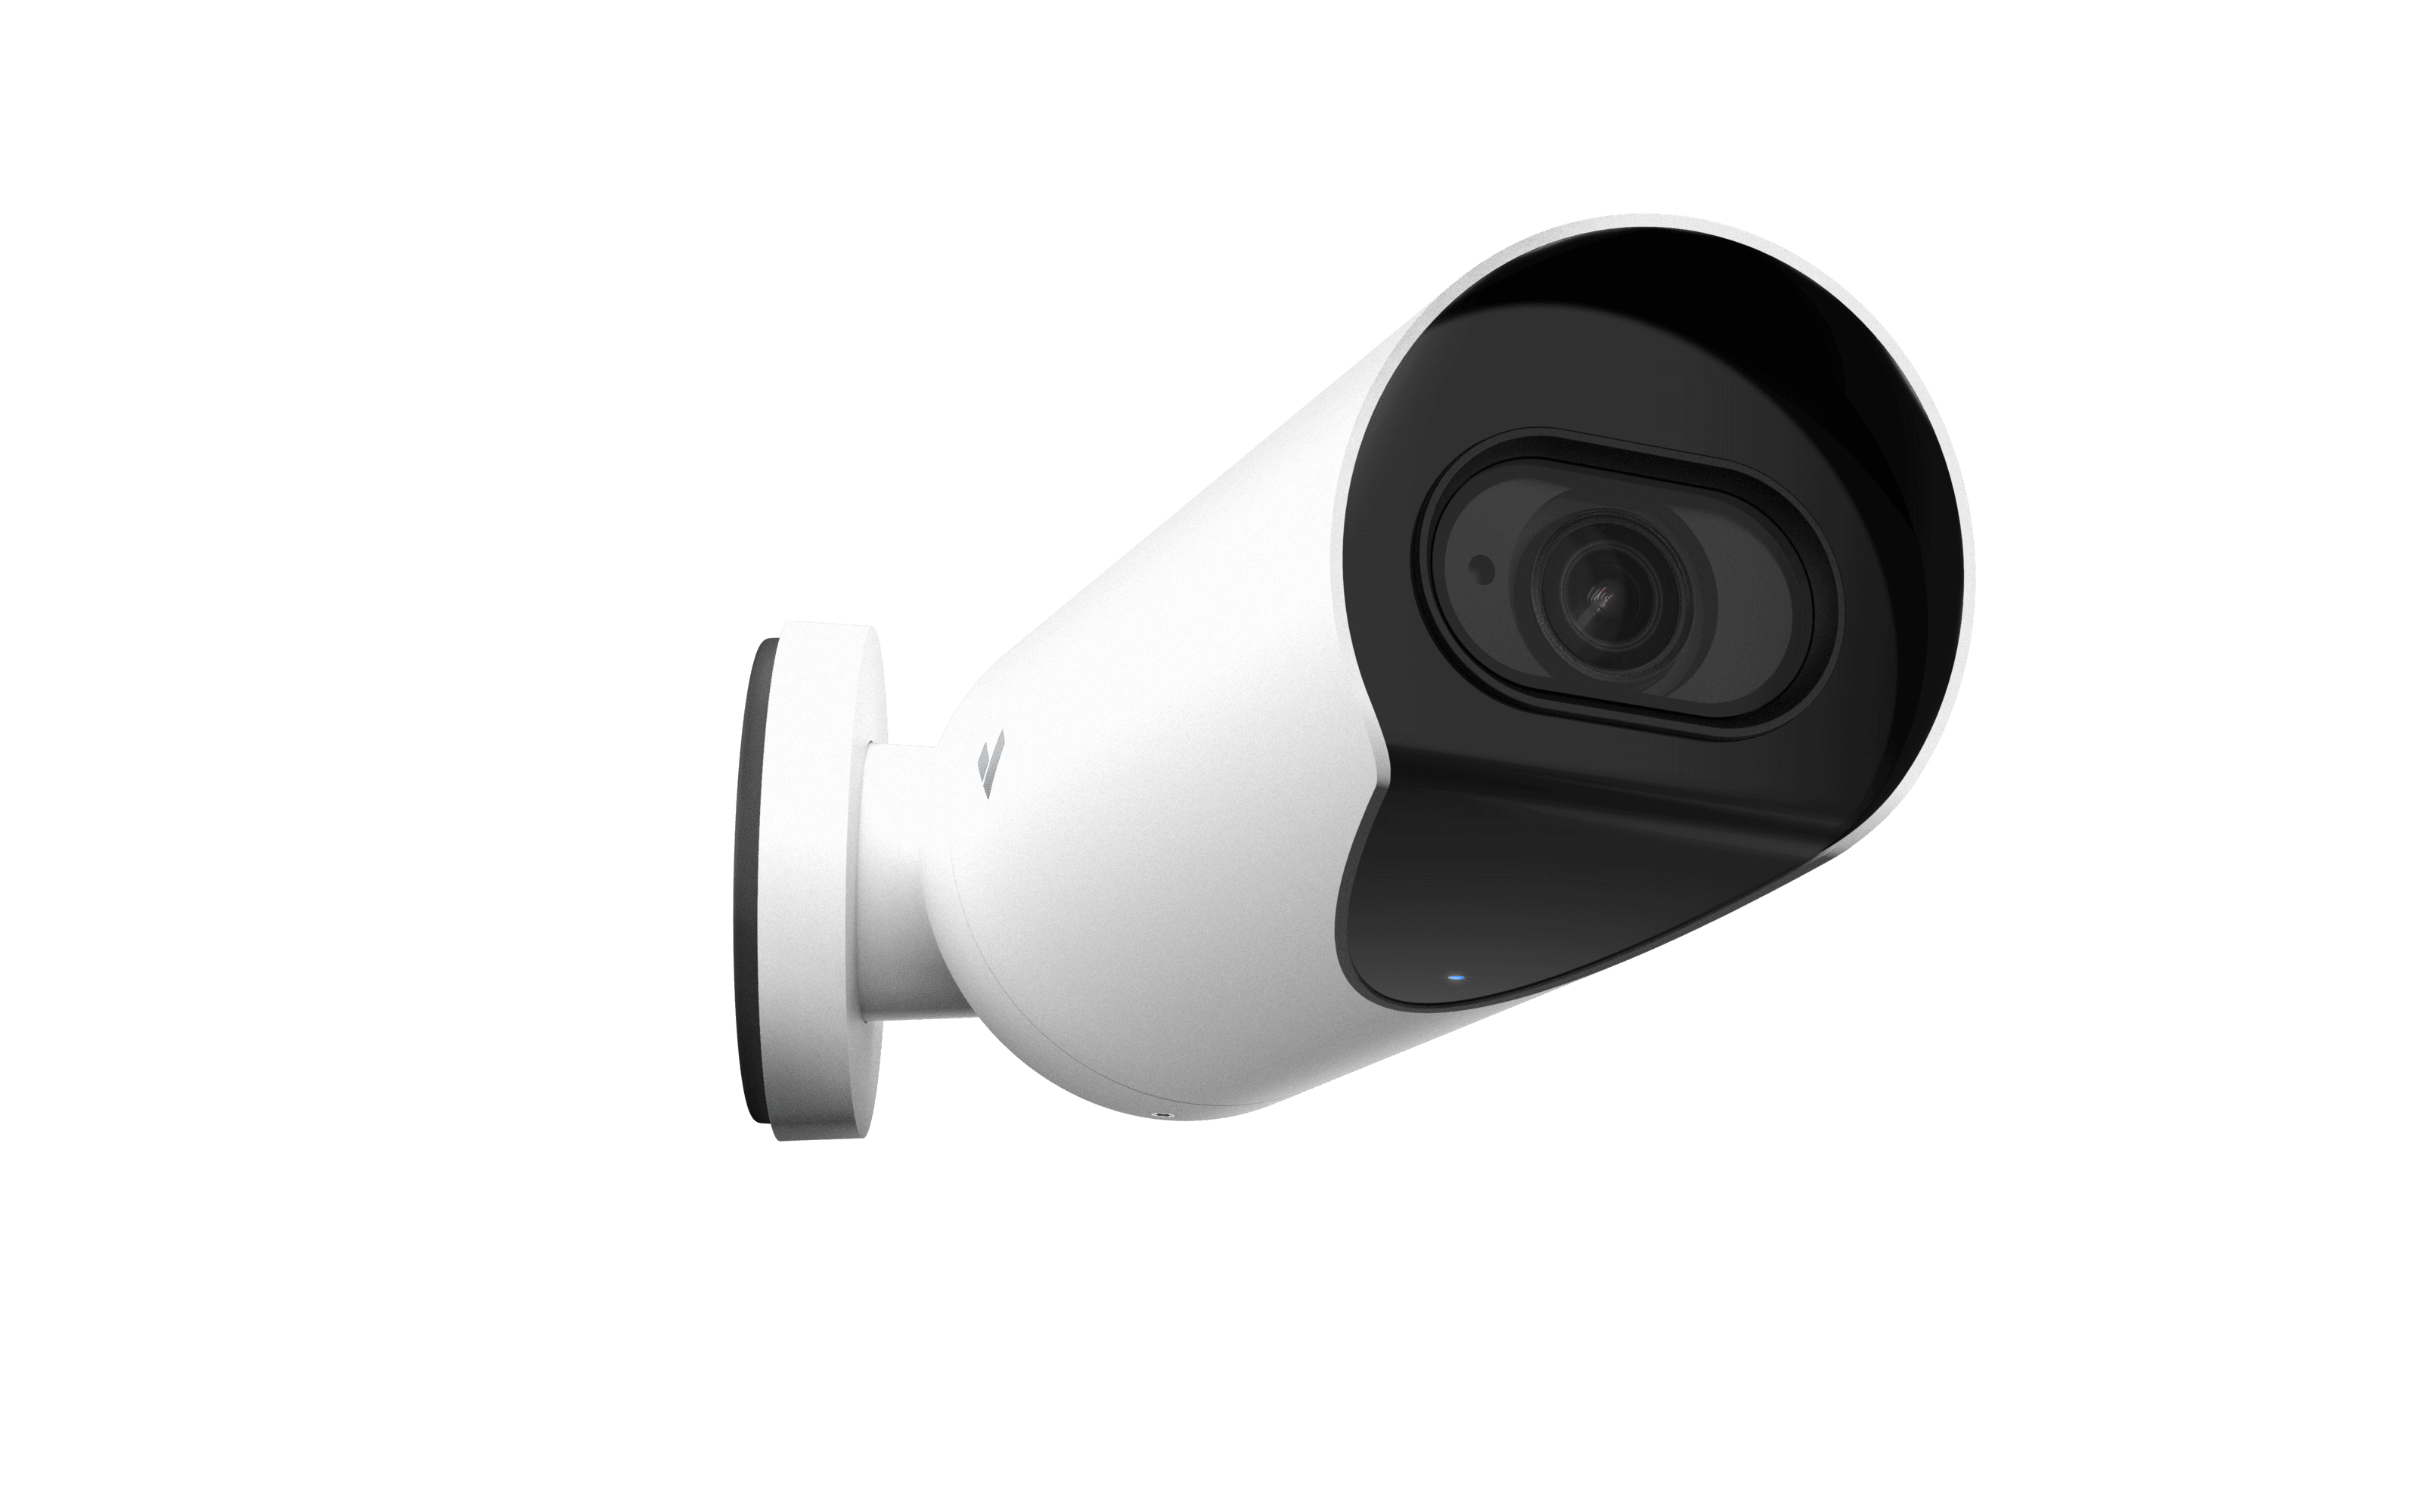 Verkada bullet camera used in the workplace for legal audio surveillance